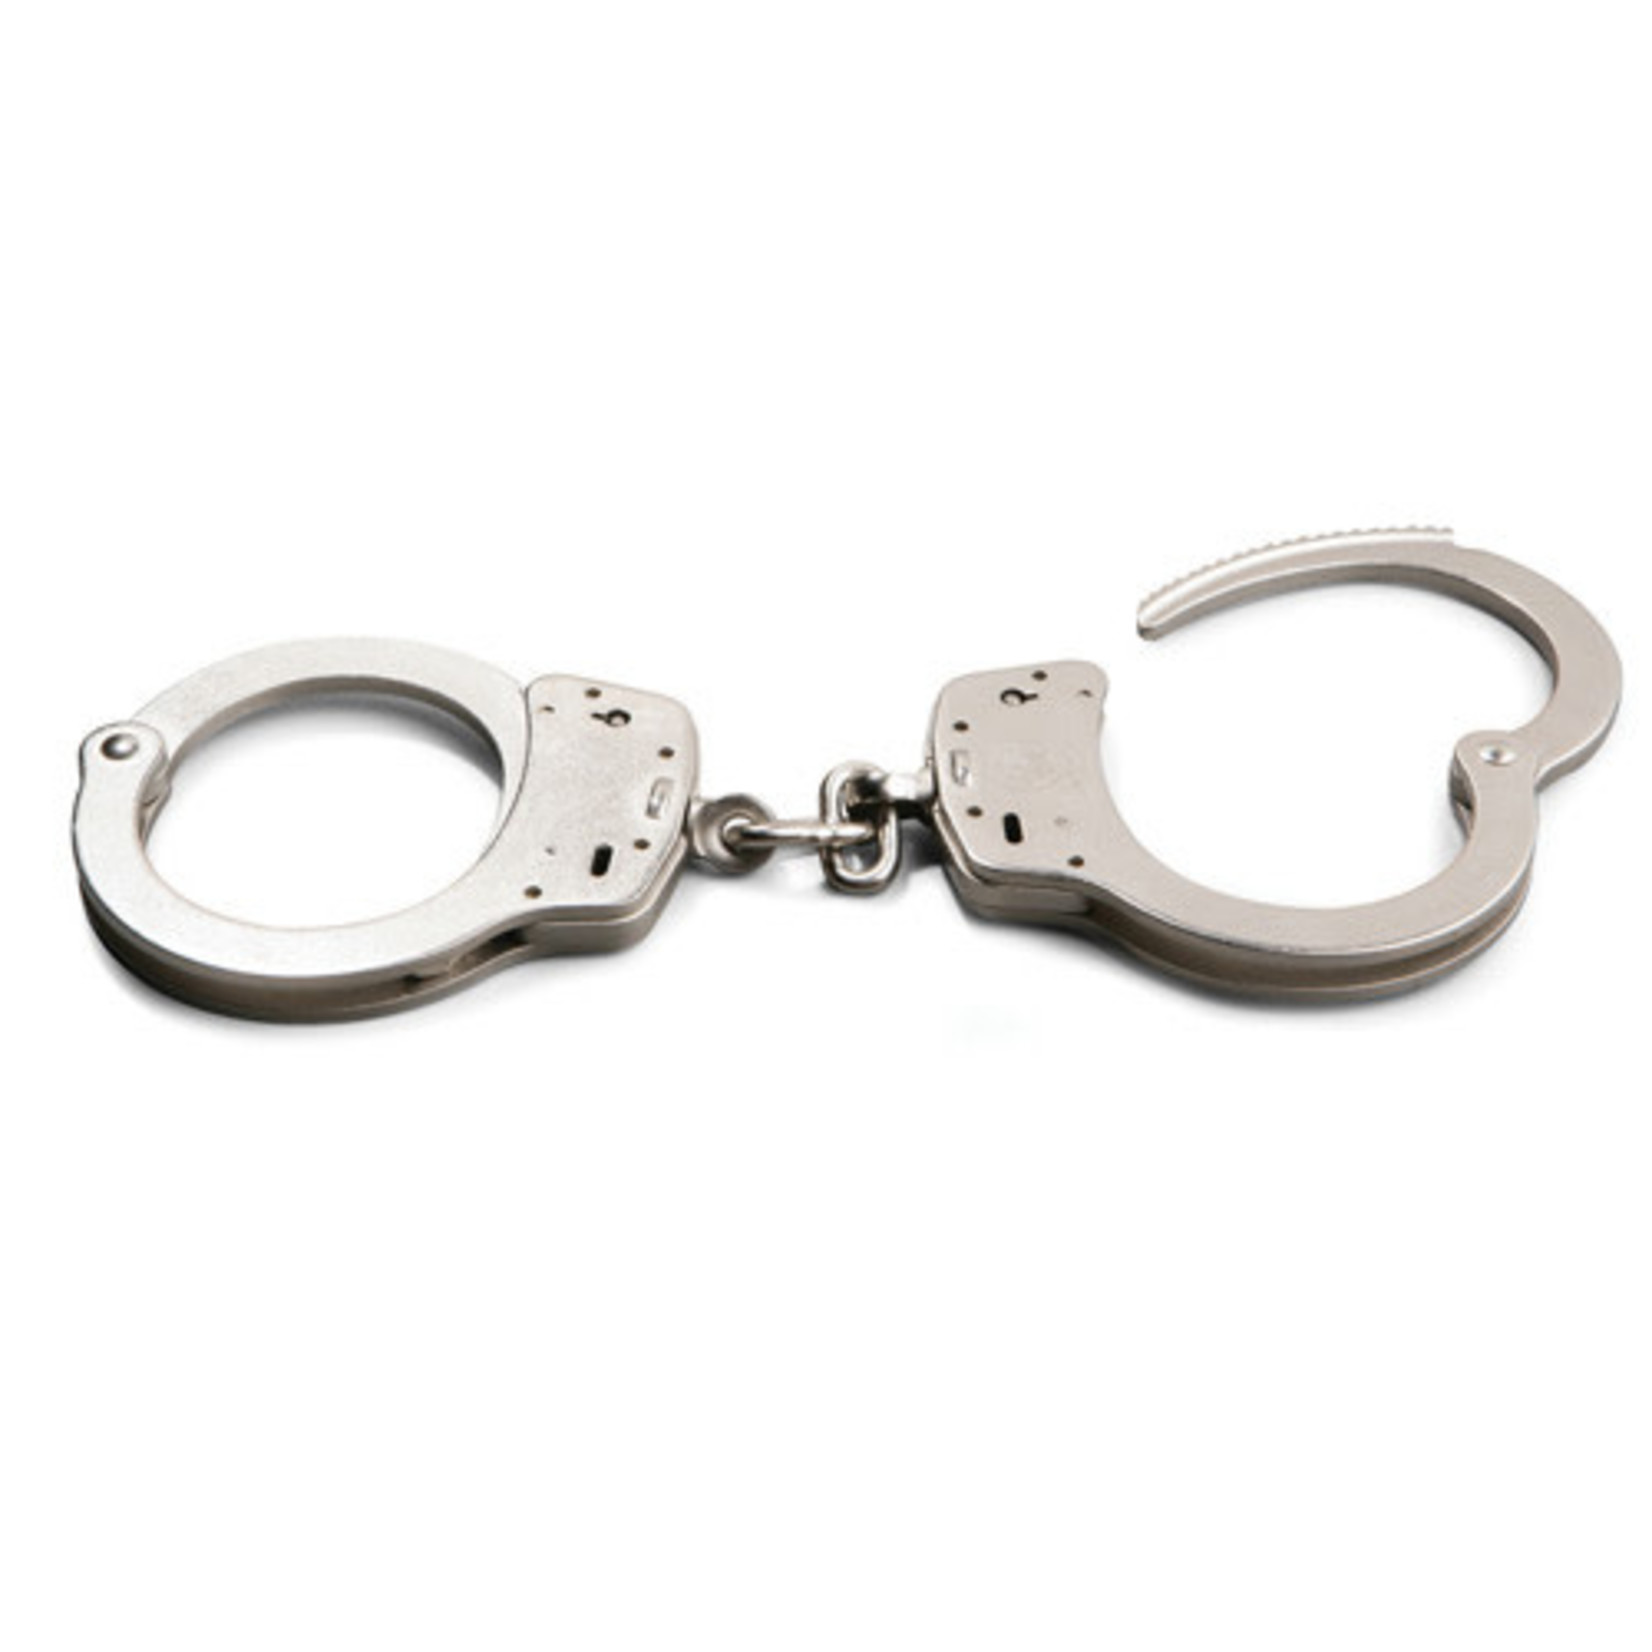 Smith & Wesson Smith & Wesson Handcuffs - 100 Nickel